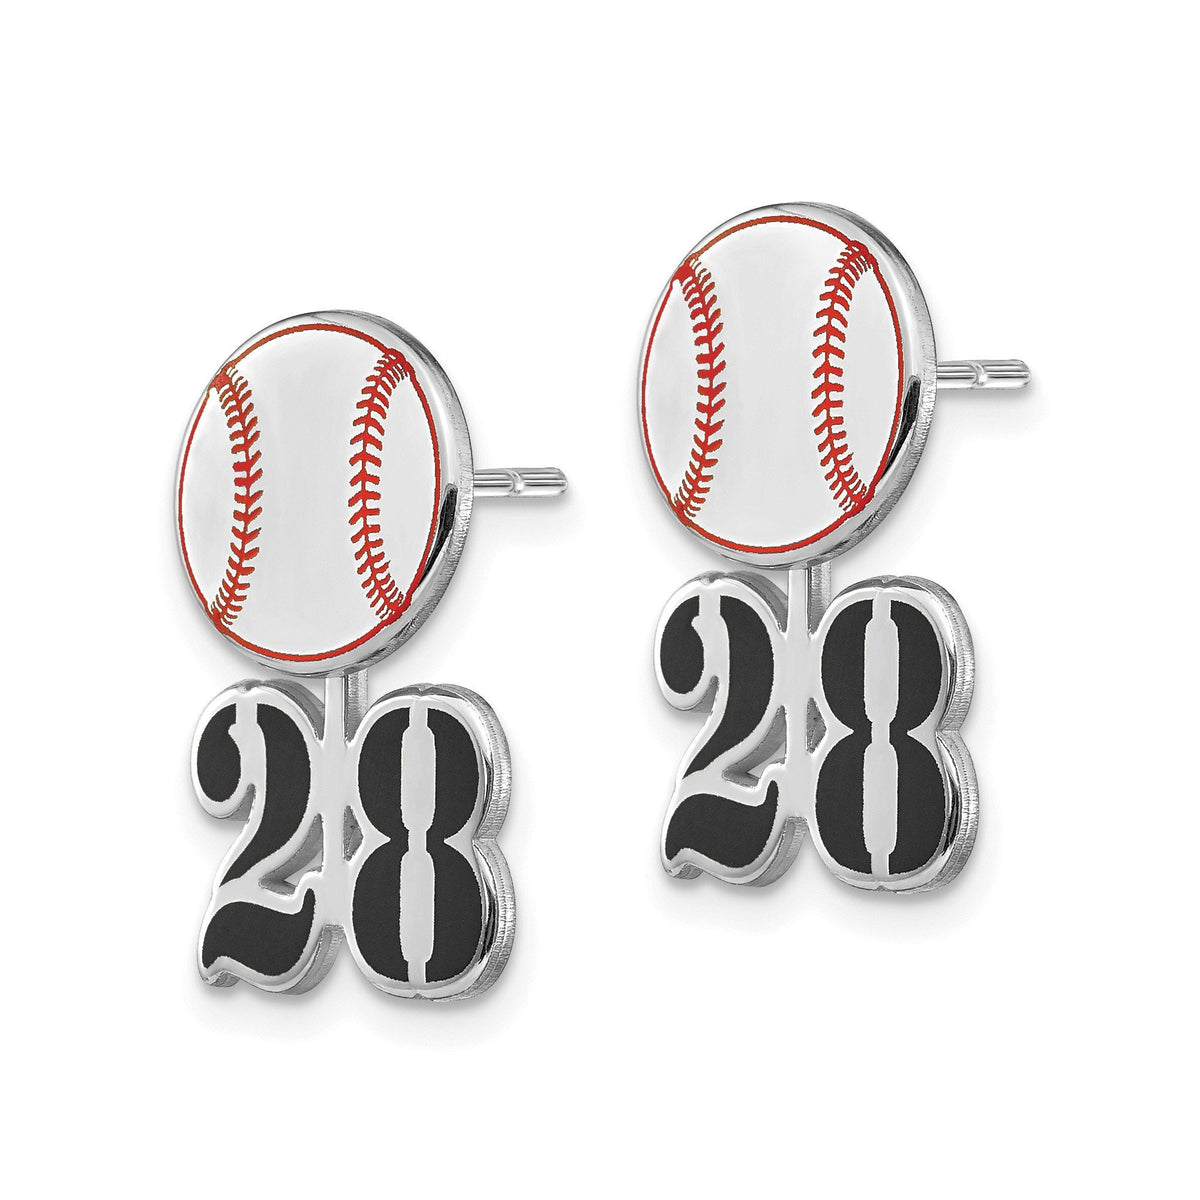 Custom Enameled Baseball / Softball Earring & Number Jacket in Sterling Silver or Gold Plated Sterling Silver -Gift Box Included-Made in USA